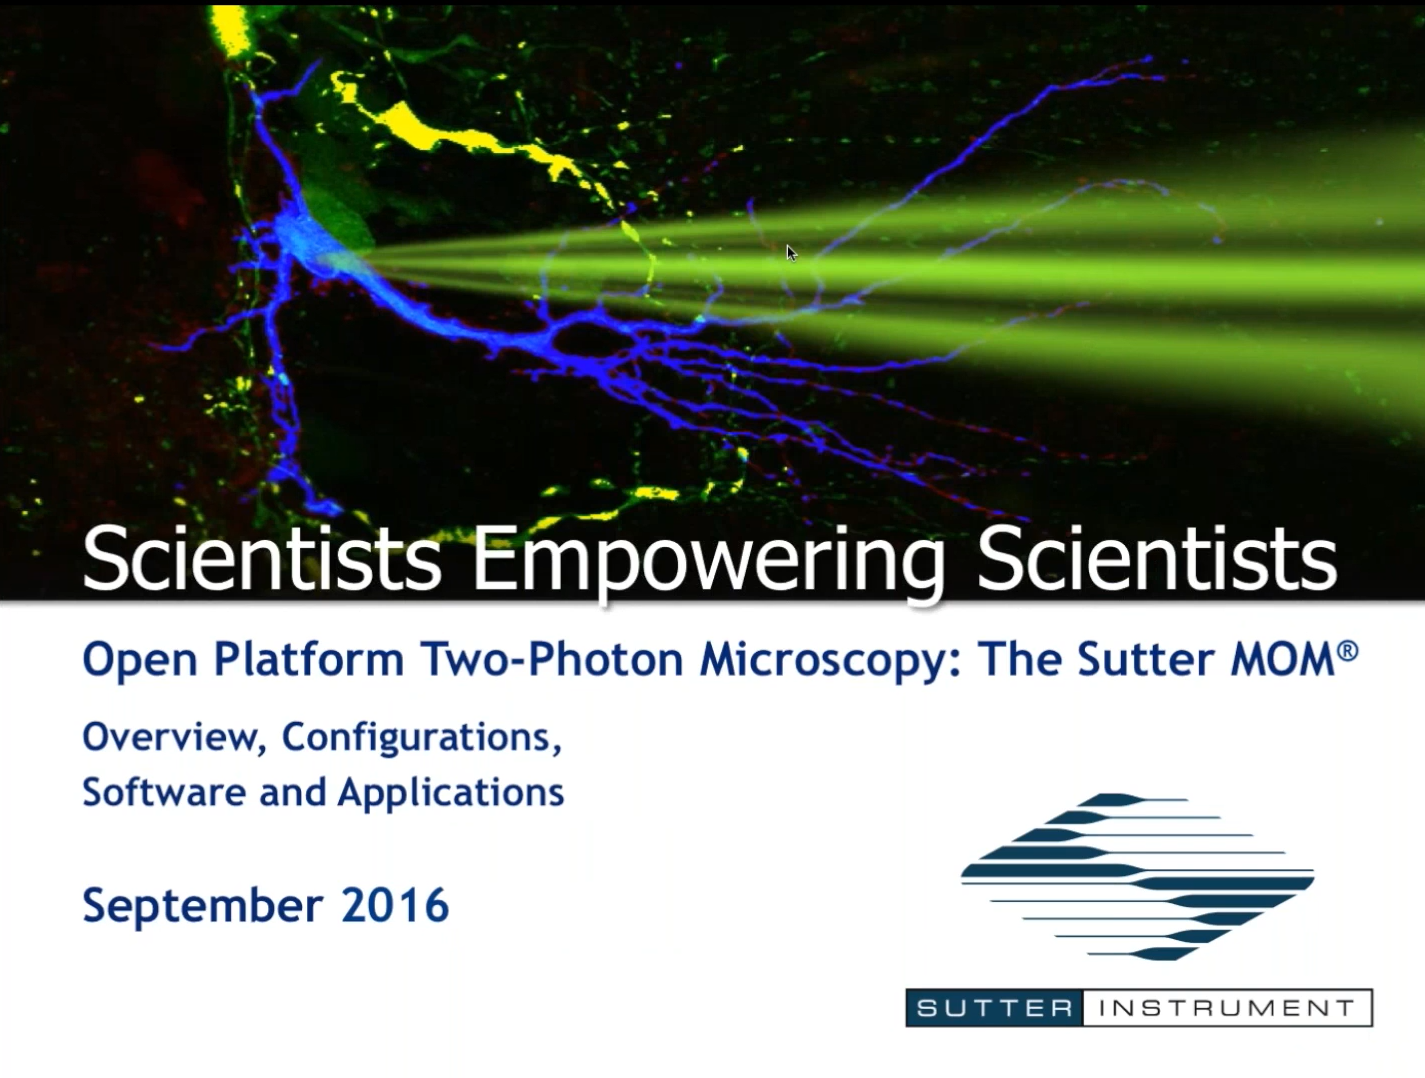 Open Platform Two-Photon Microscopy: The Sutter MOM